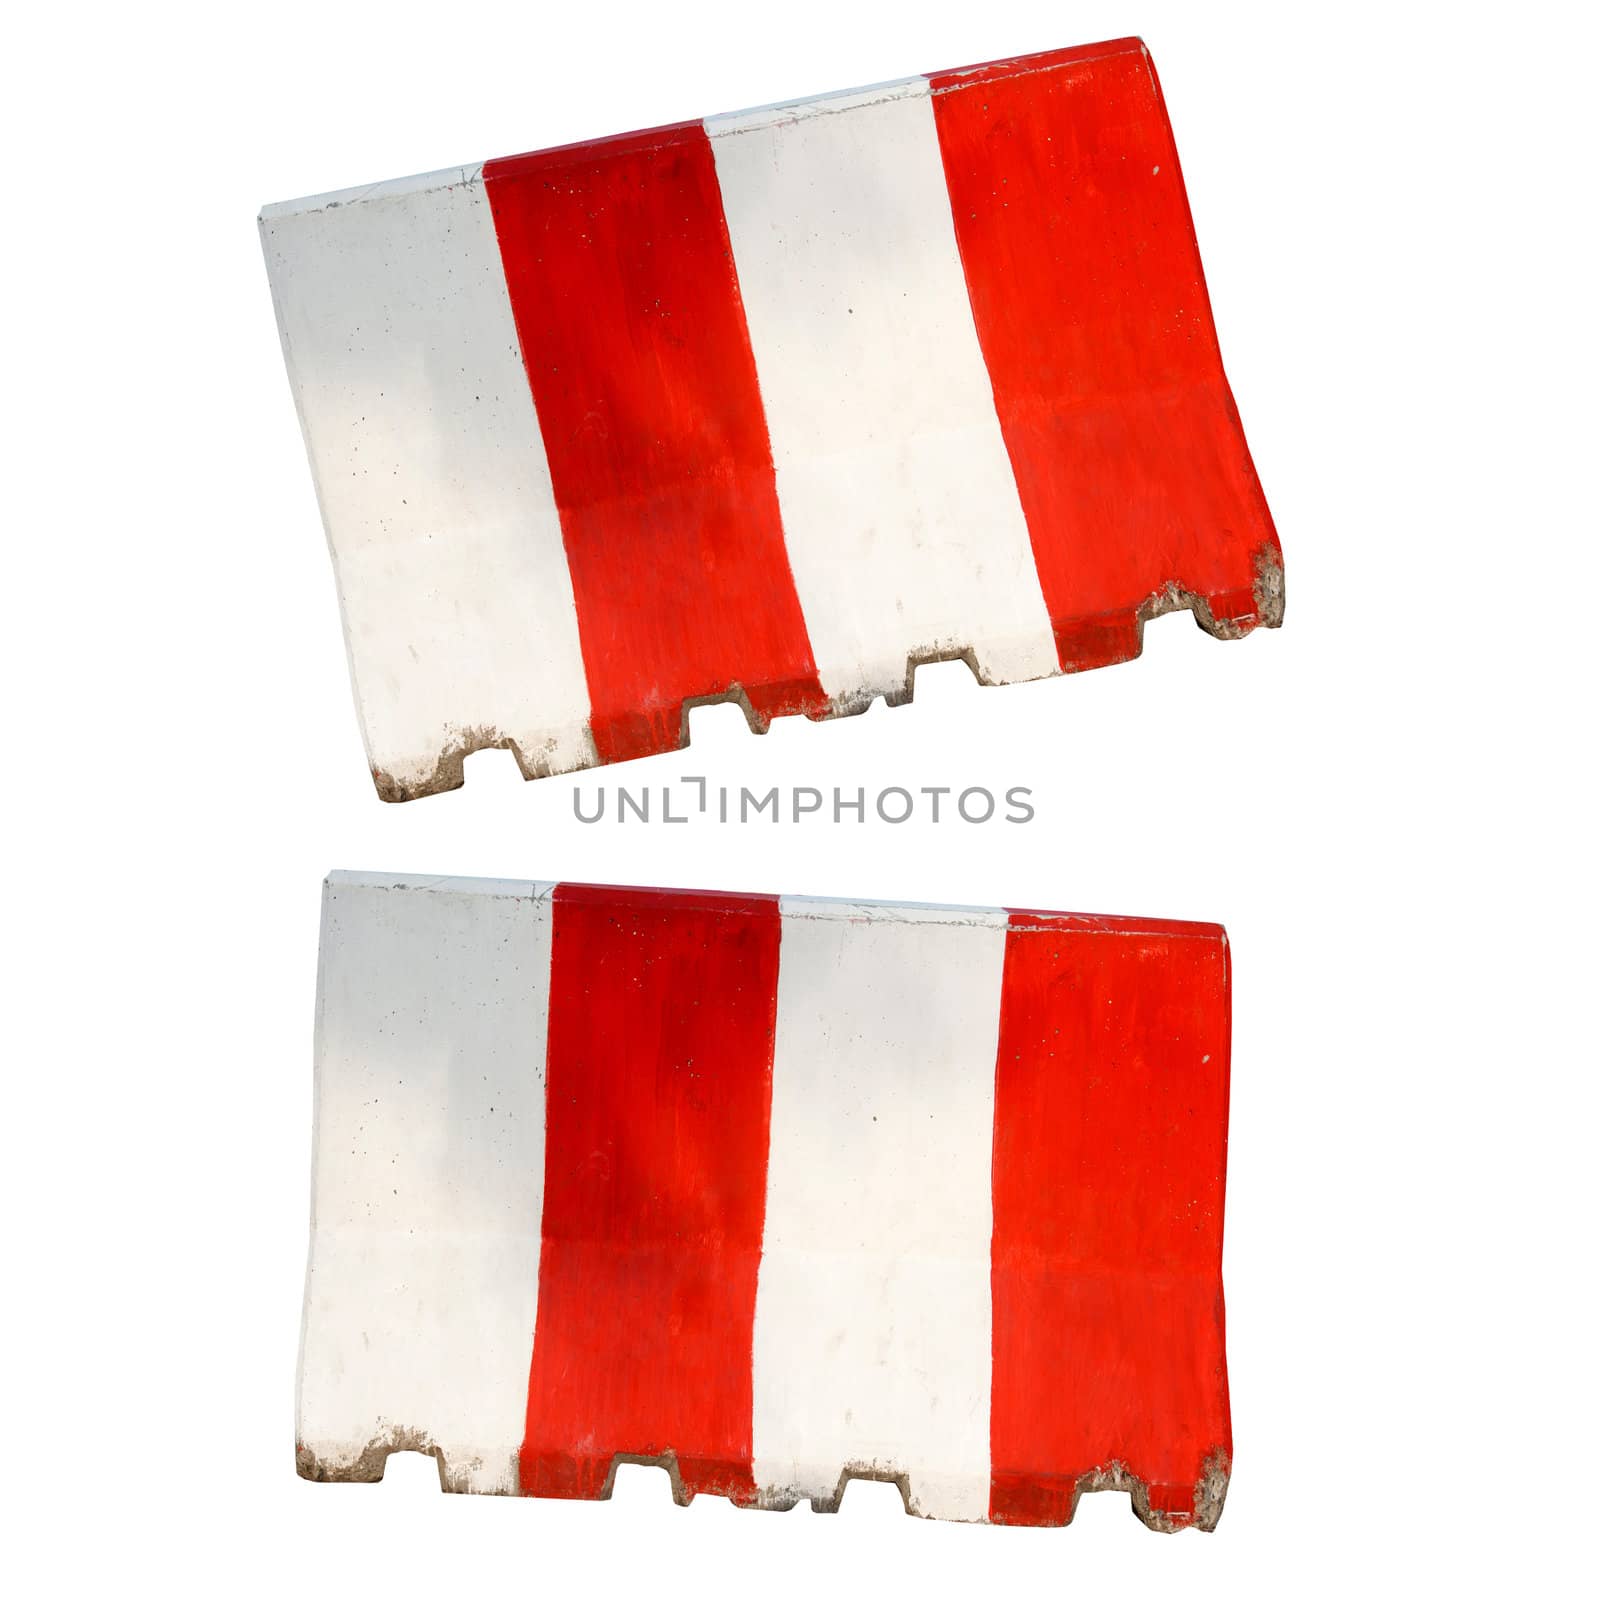 The twin red and white concrete barriers by rainyrf